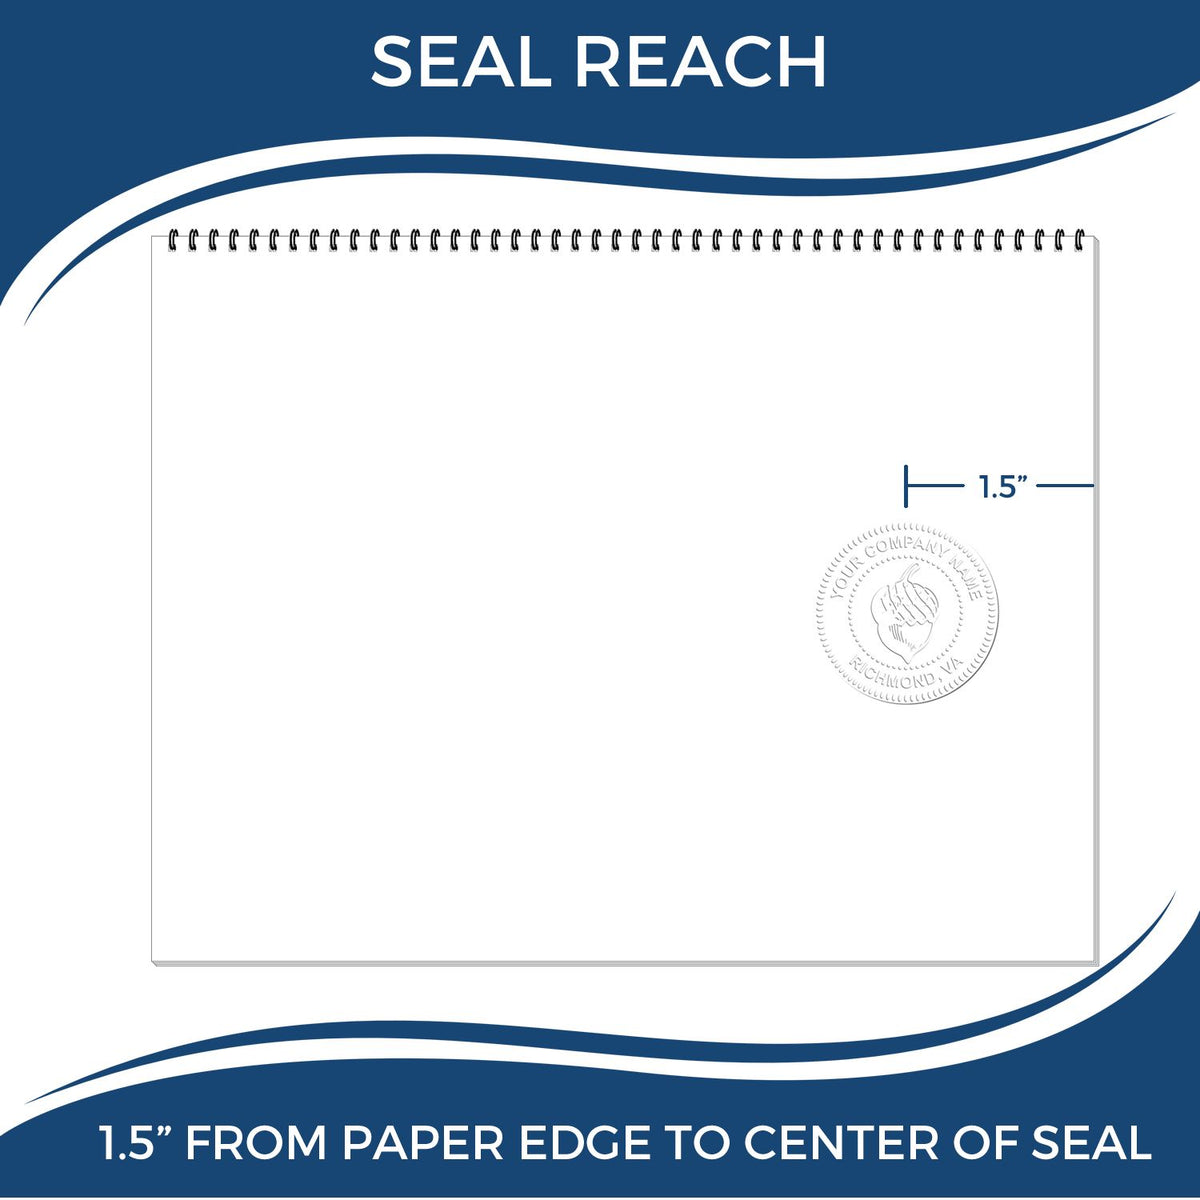 An infographic showing the seal reach which is represented by a ruler and a miniature seal image of the Soft Alaska Professional Engineer Seal